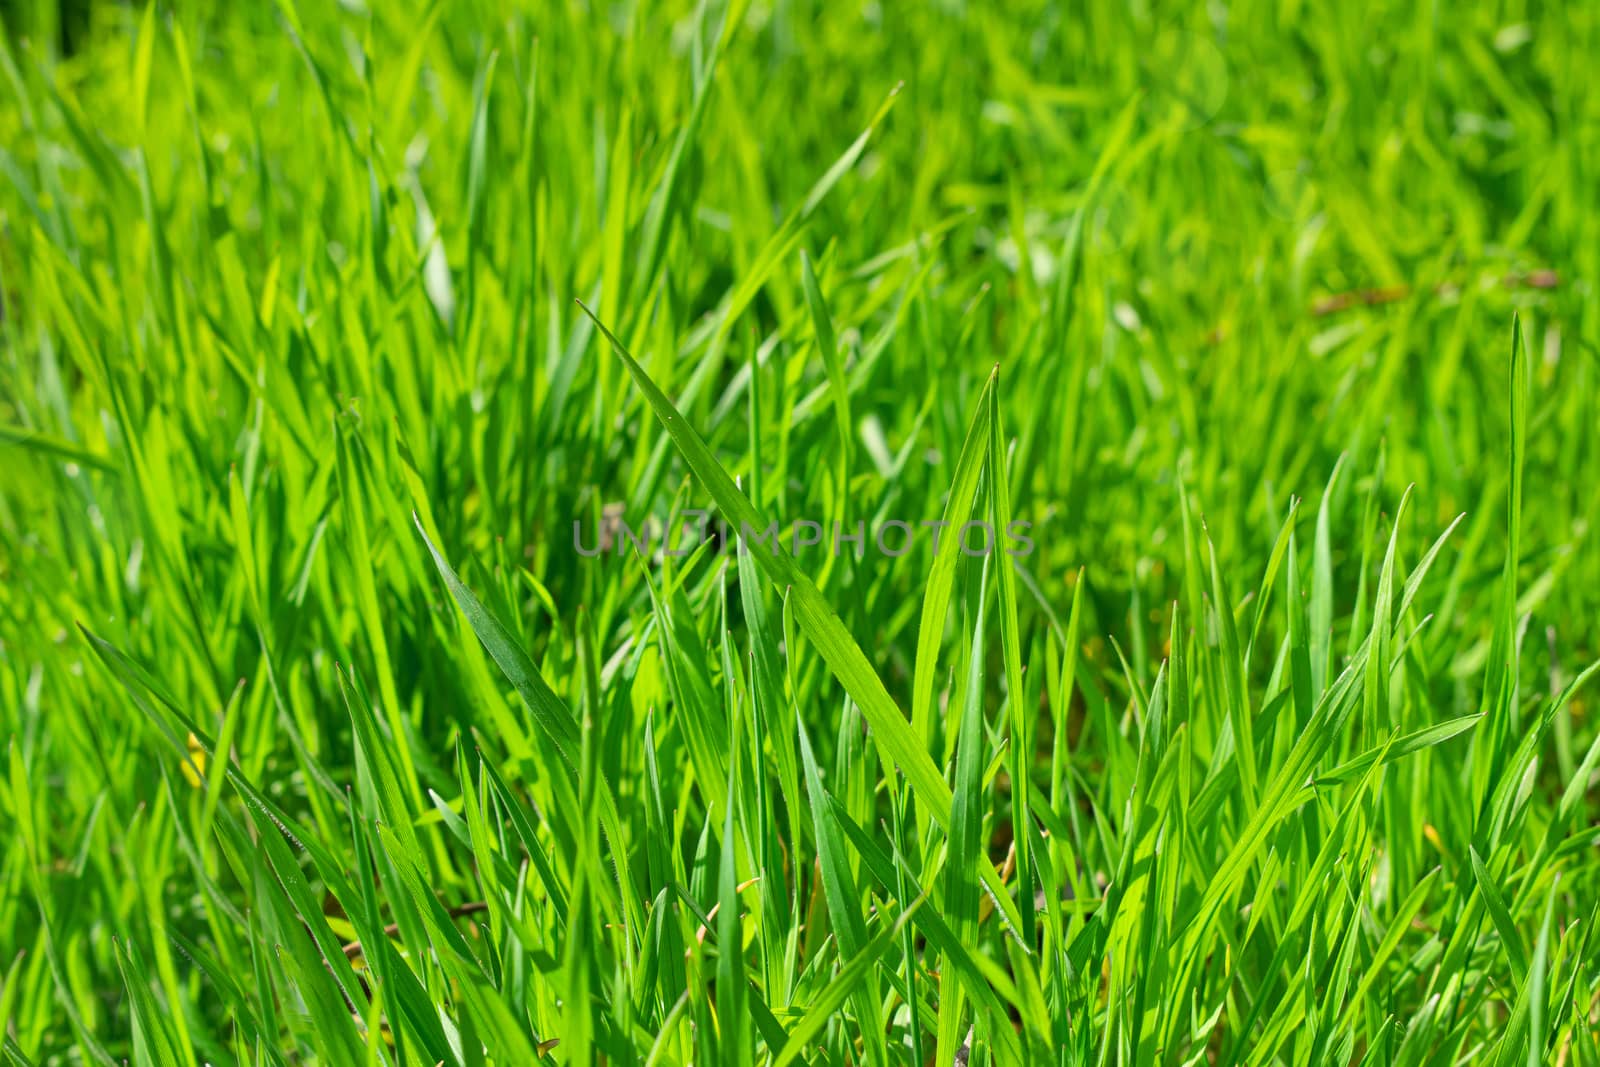 Grass close up with shallow depth of field. Grassy green decorative background.